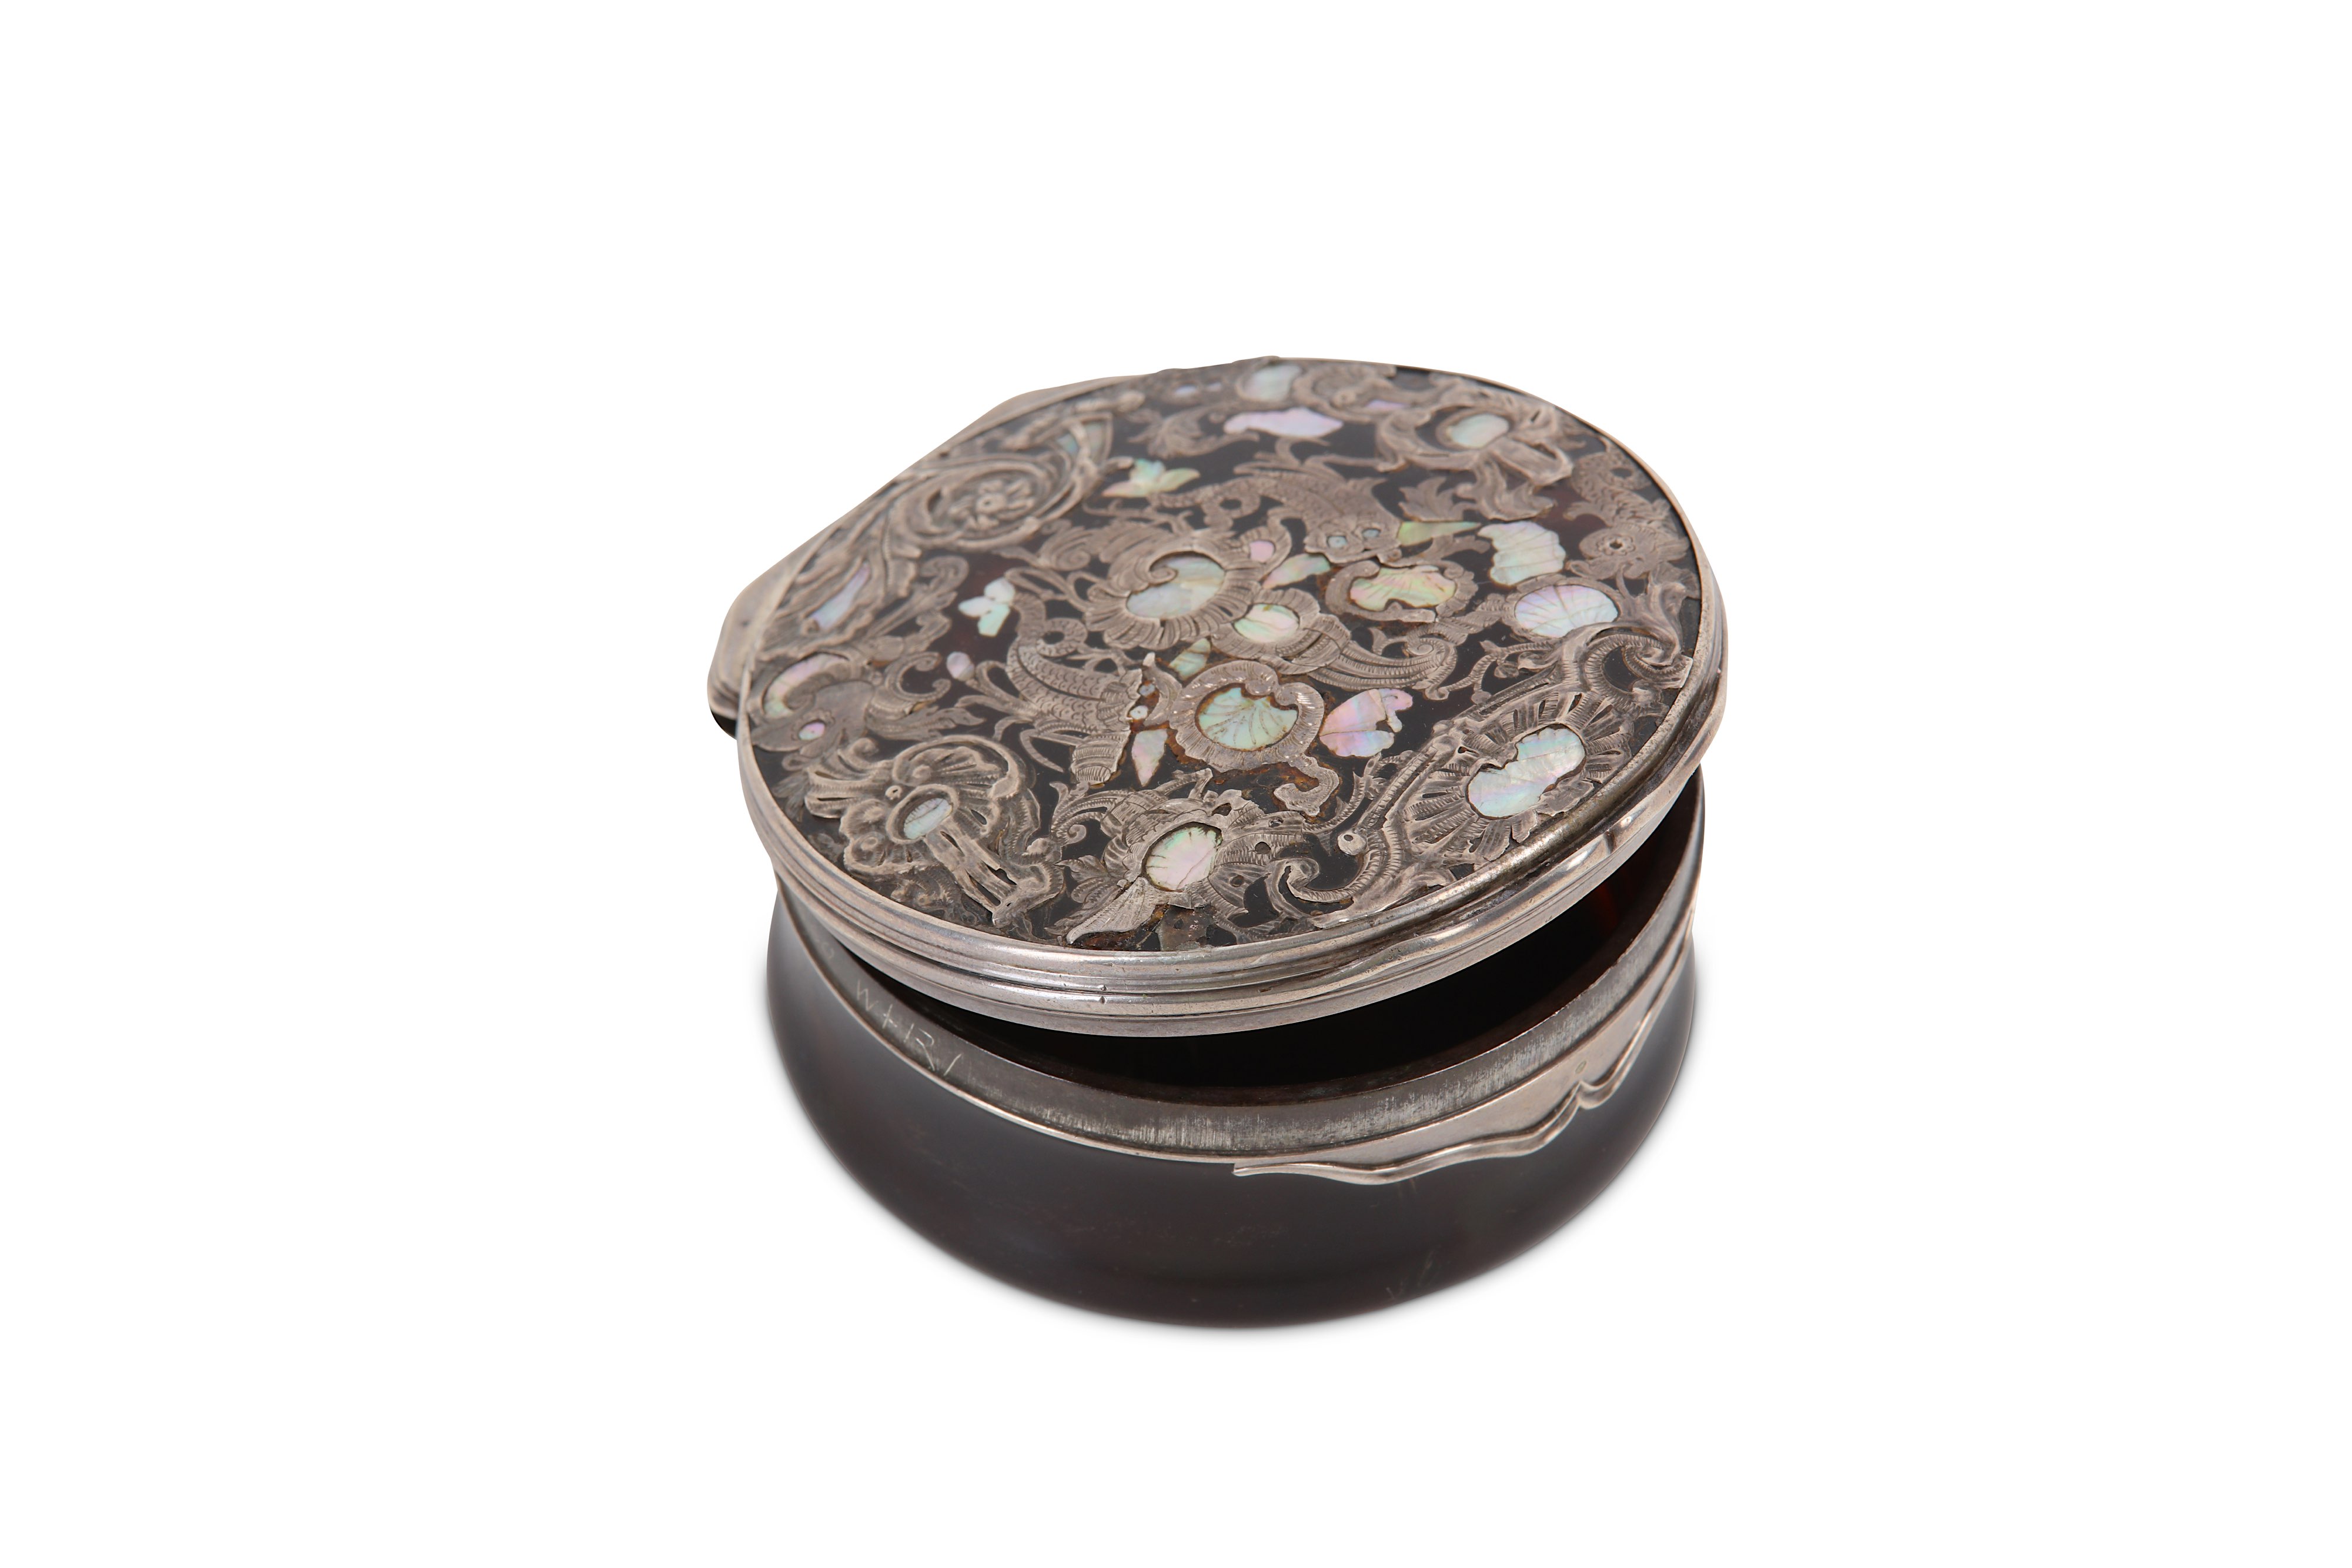 A Louis XV French unmarked silver mounted tortoiseshell snuff box, circa 1730-50 - Image 2 of 2